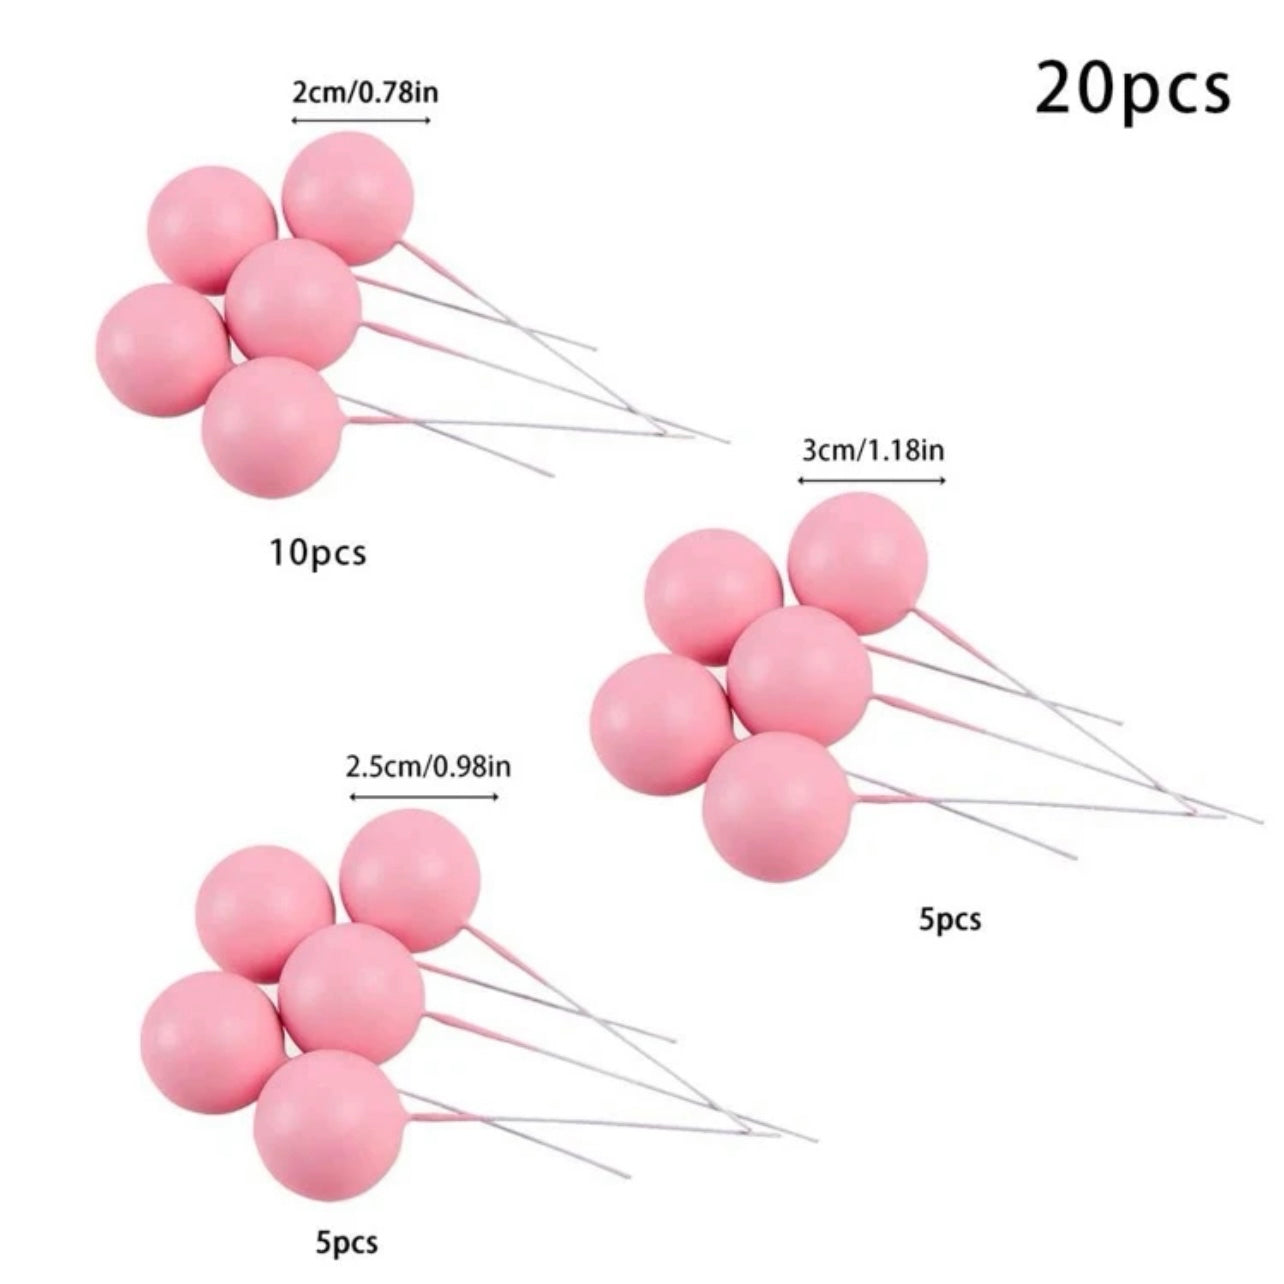 PINK BALLS - PACK OF 20